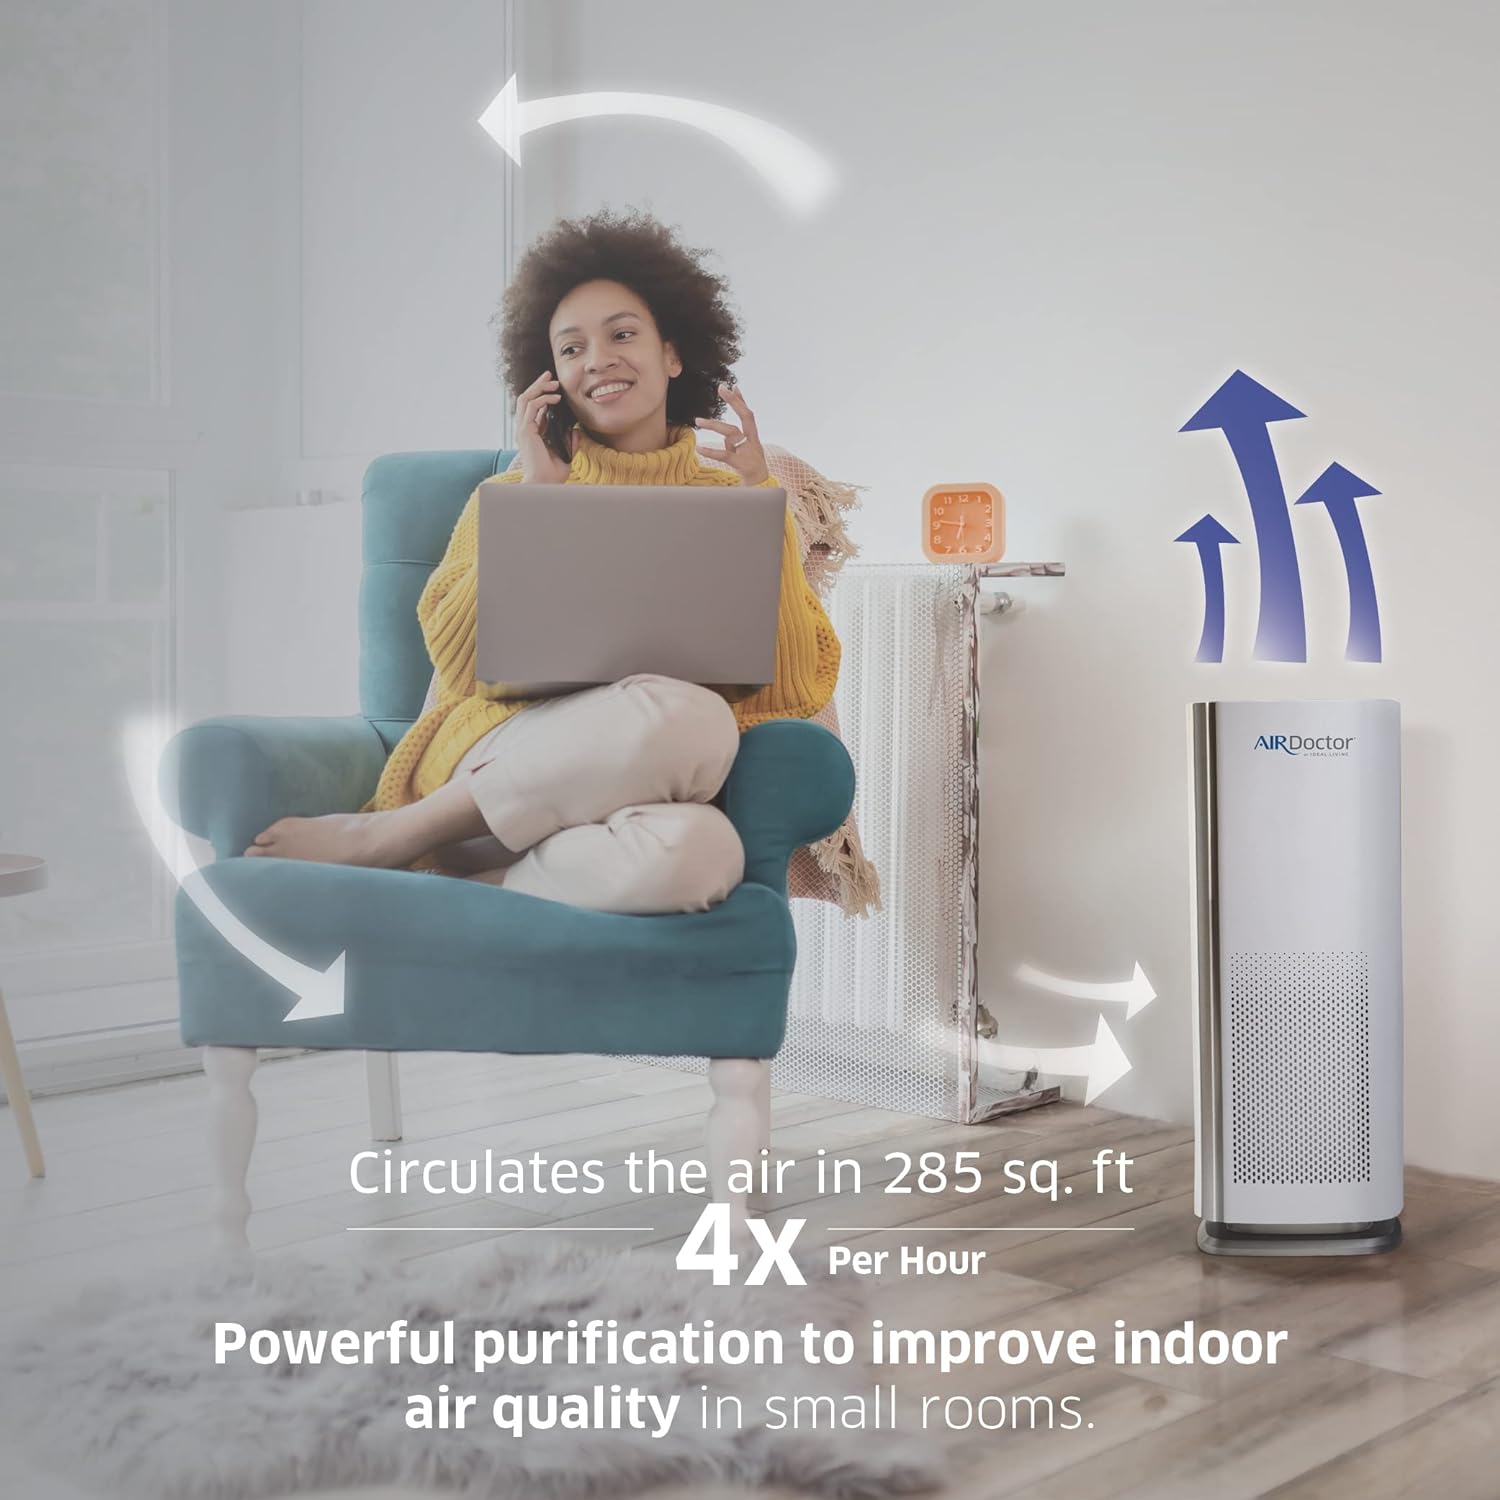 AIRDOCTOR AD1000 4-in-1 Air Purifier | Perfect for Guest Rooms, Kids Bedrooms and Home Offices | Circulates the Air in 285 sq. ft. 4x/hour